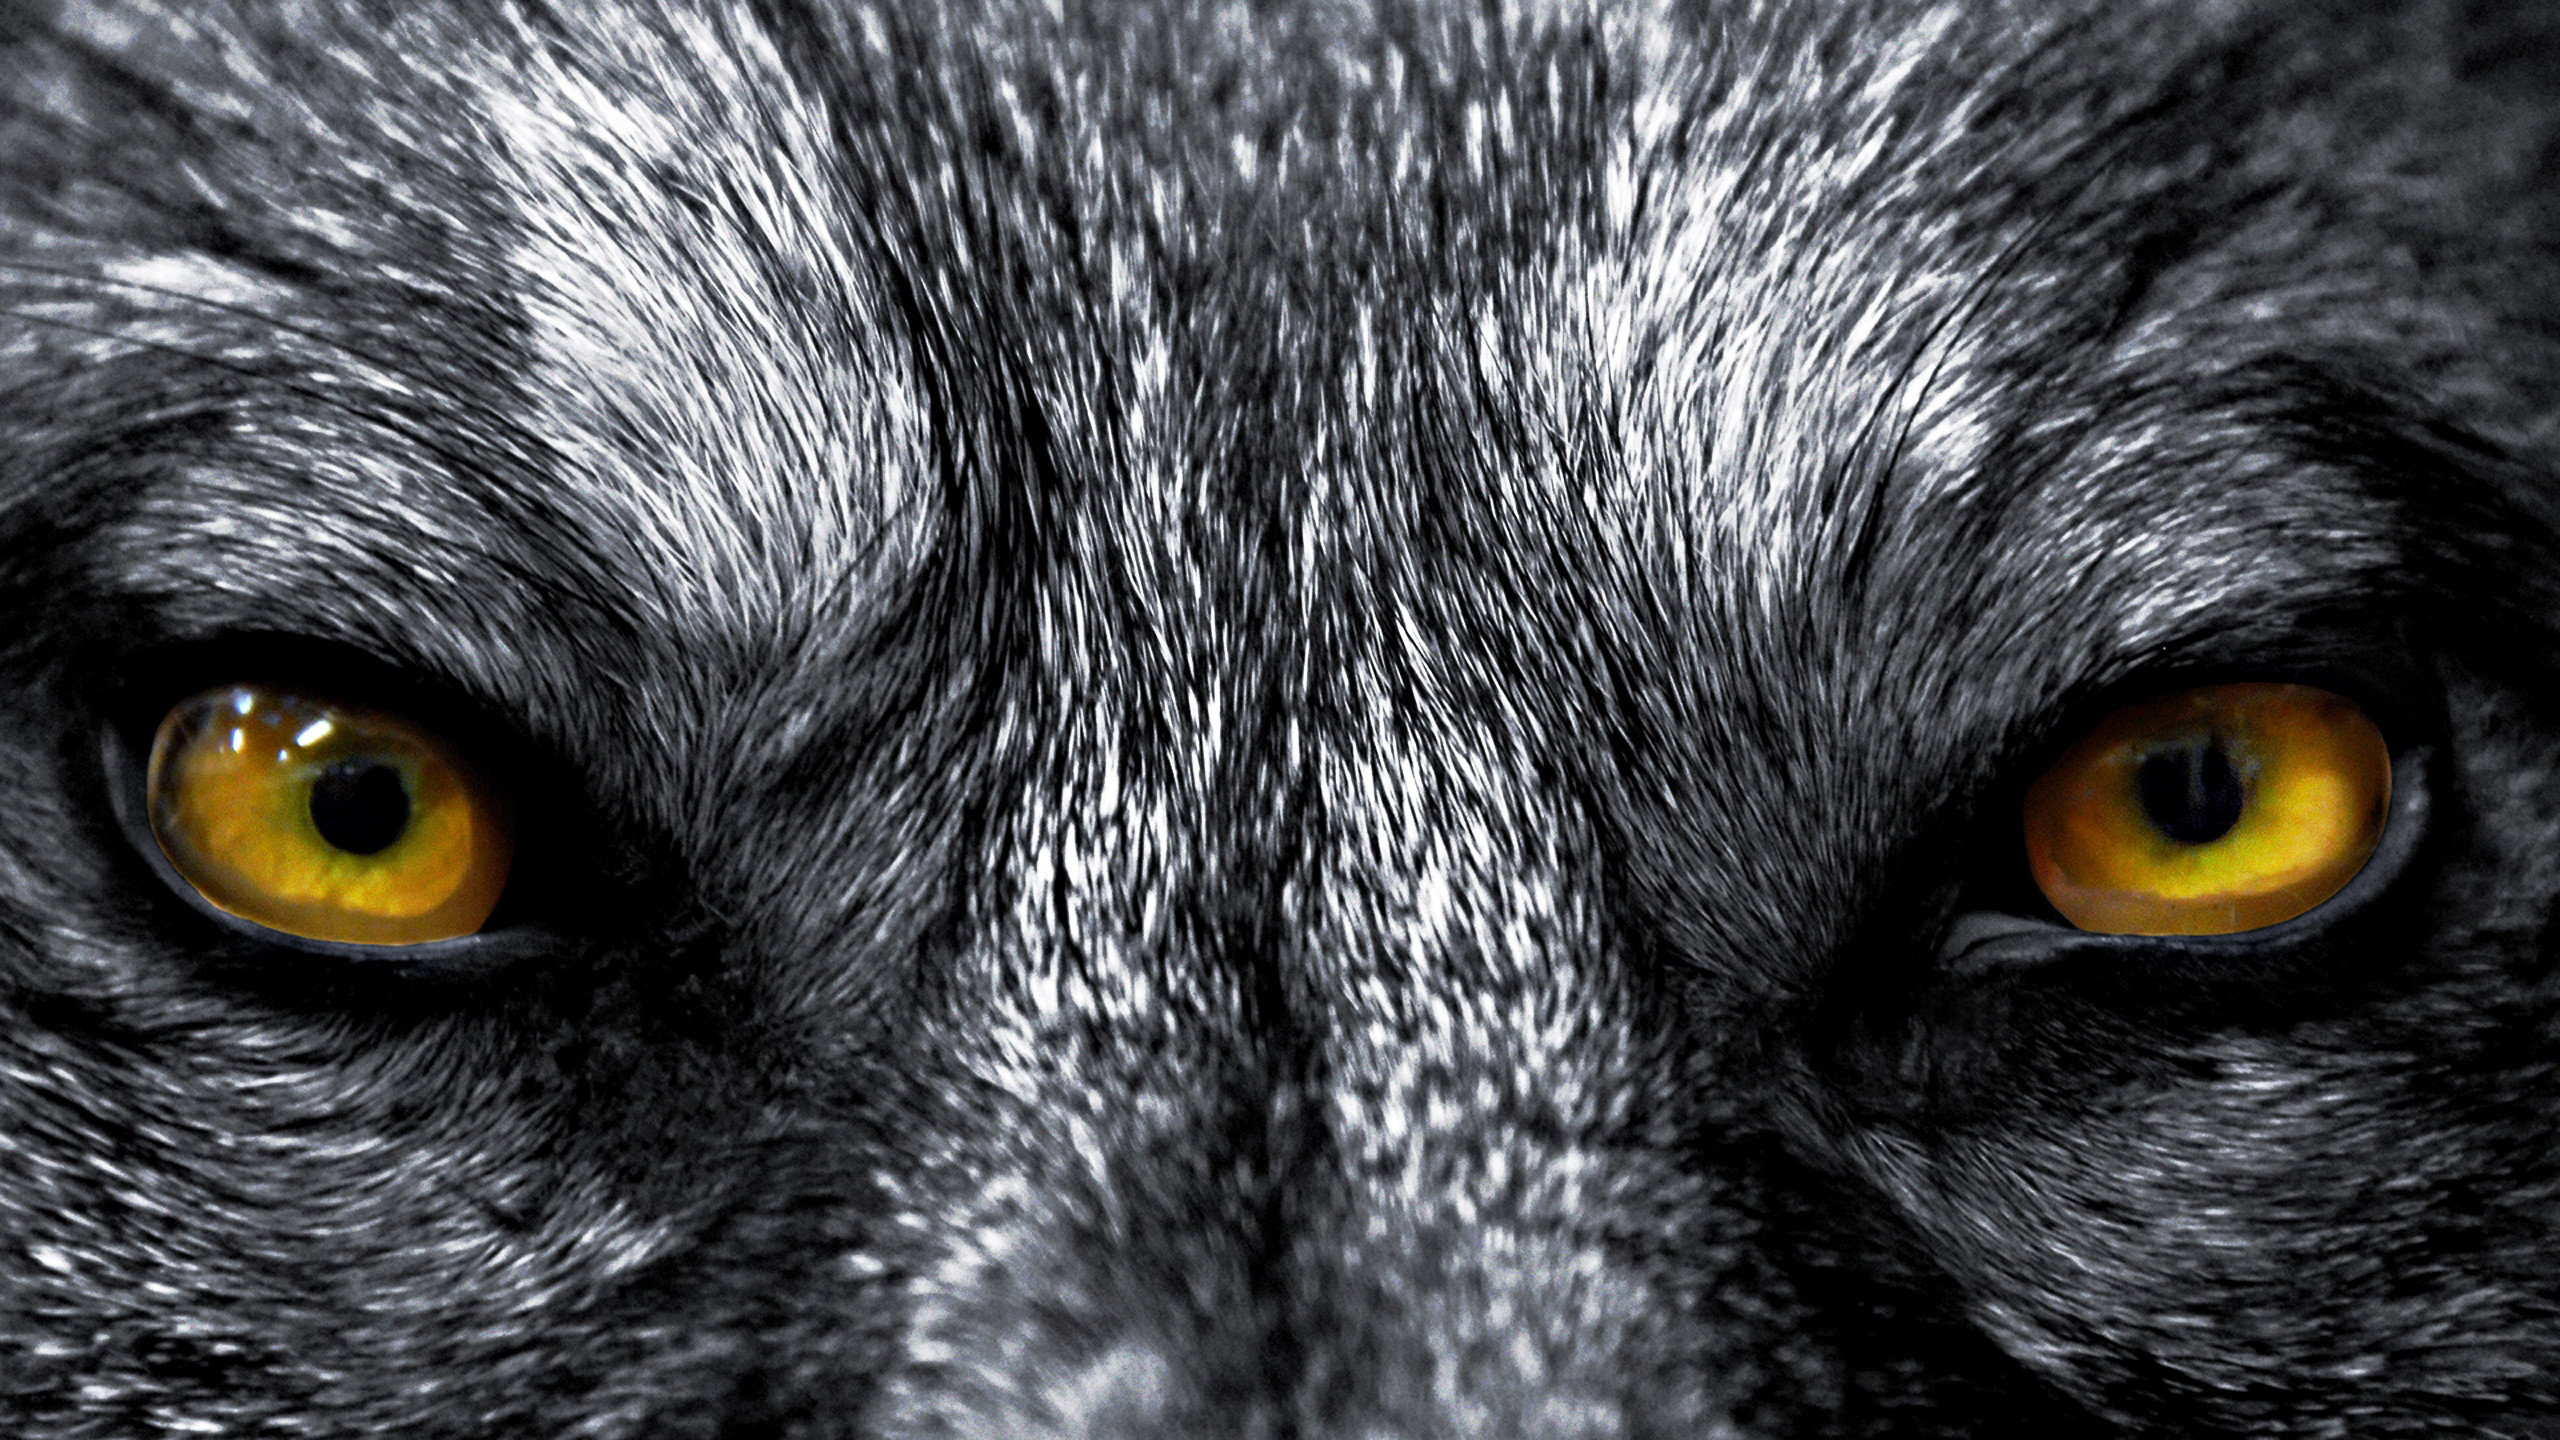 2560x1440 Disturbed - The Animal Wallpaper by disturbedkorea Disturbed - The Animal  Wallpaper by disturbedkorea